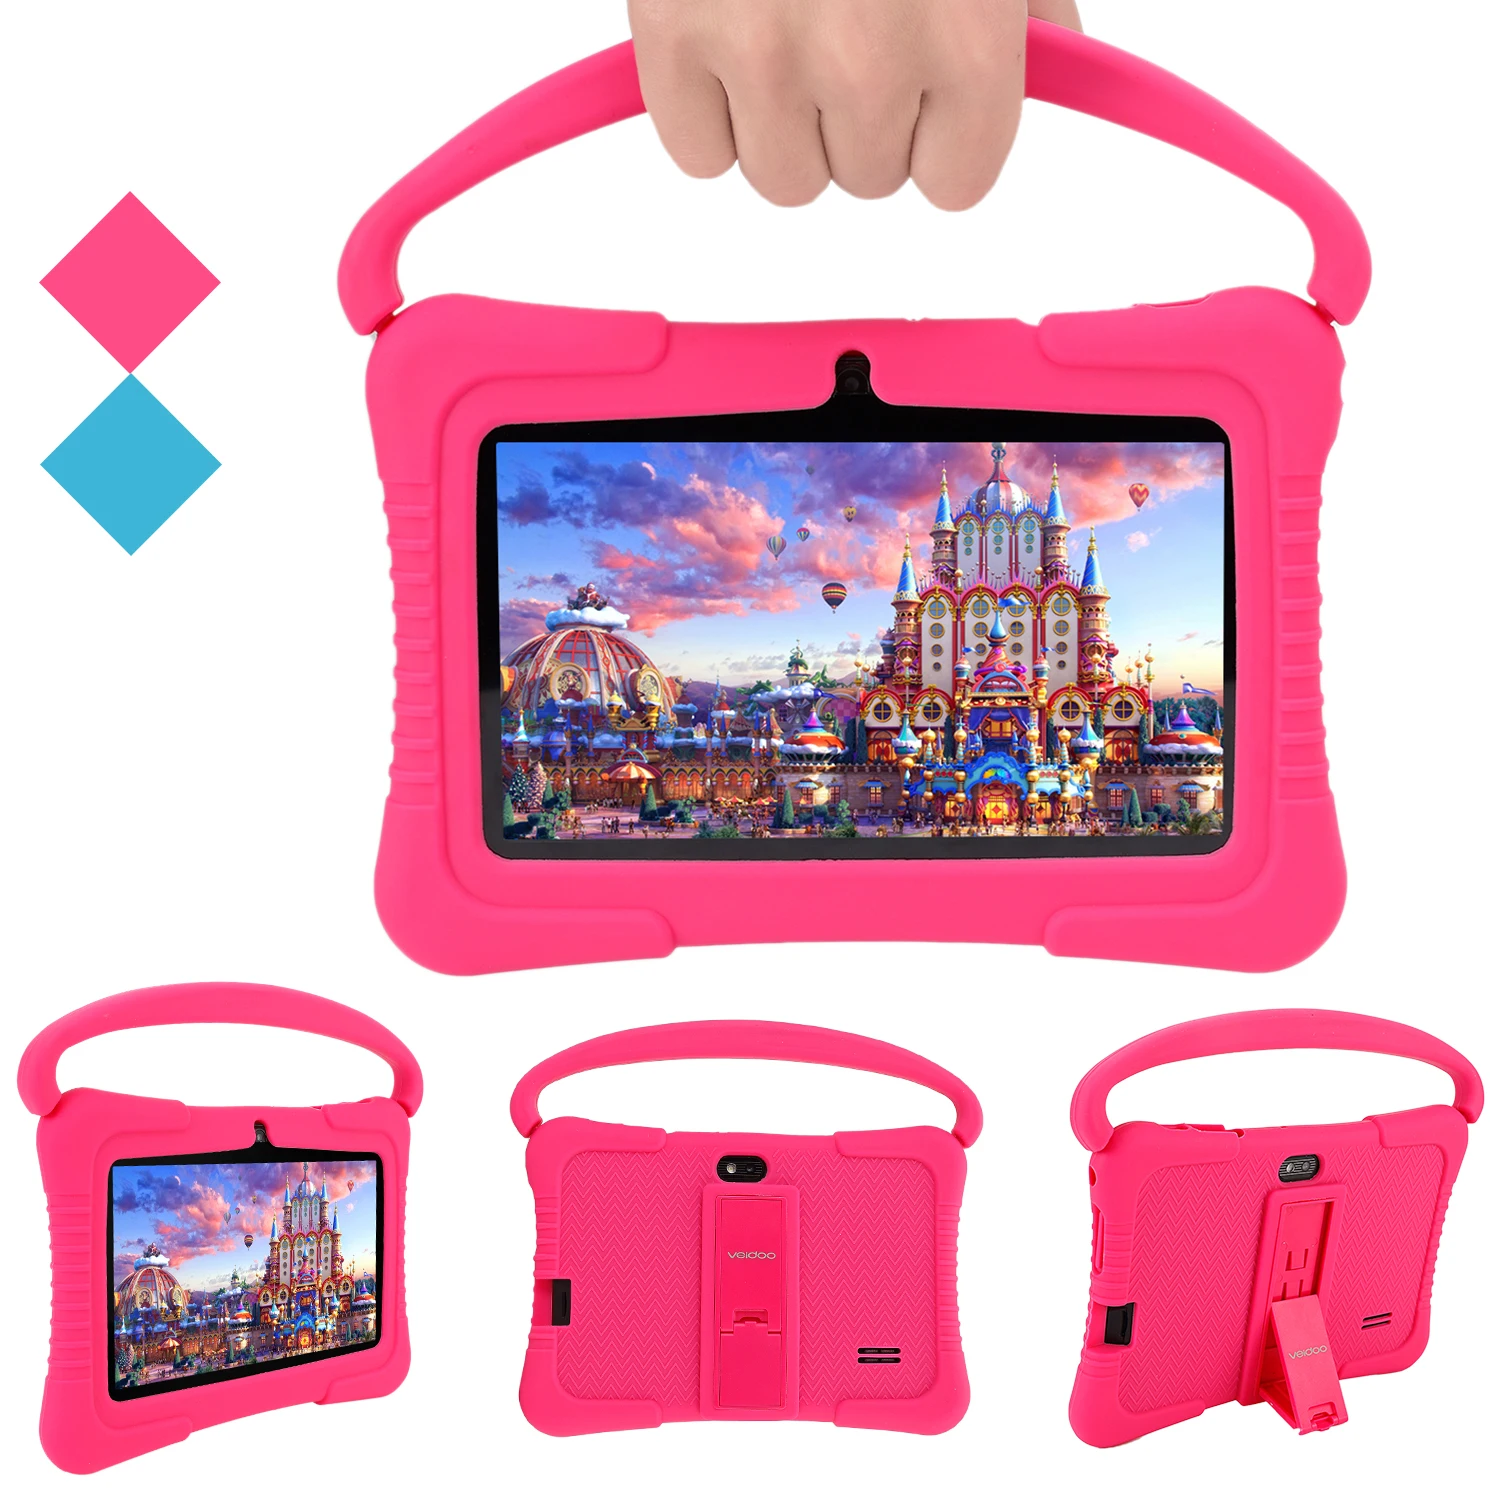 

Veidoo 7 inch 1GB 16GB Kids Tablet for Toddlers Android Tablets PC WiFi Education Games IPS Screen Tablet with Silicone Case, Blue, pink